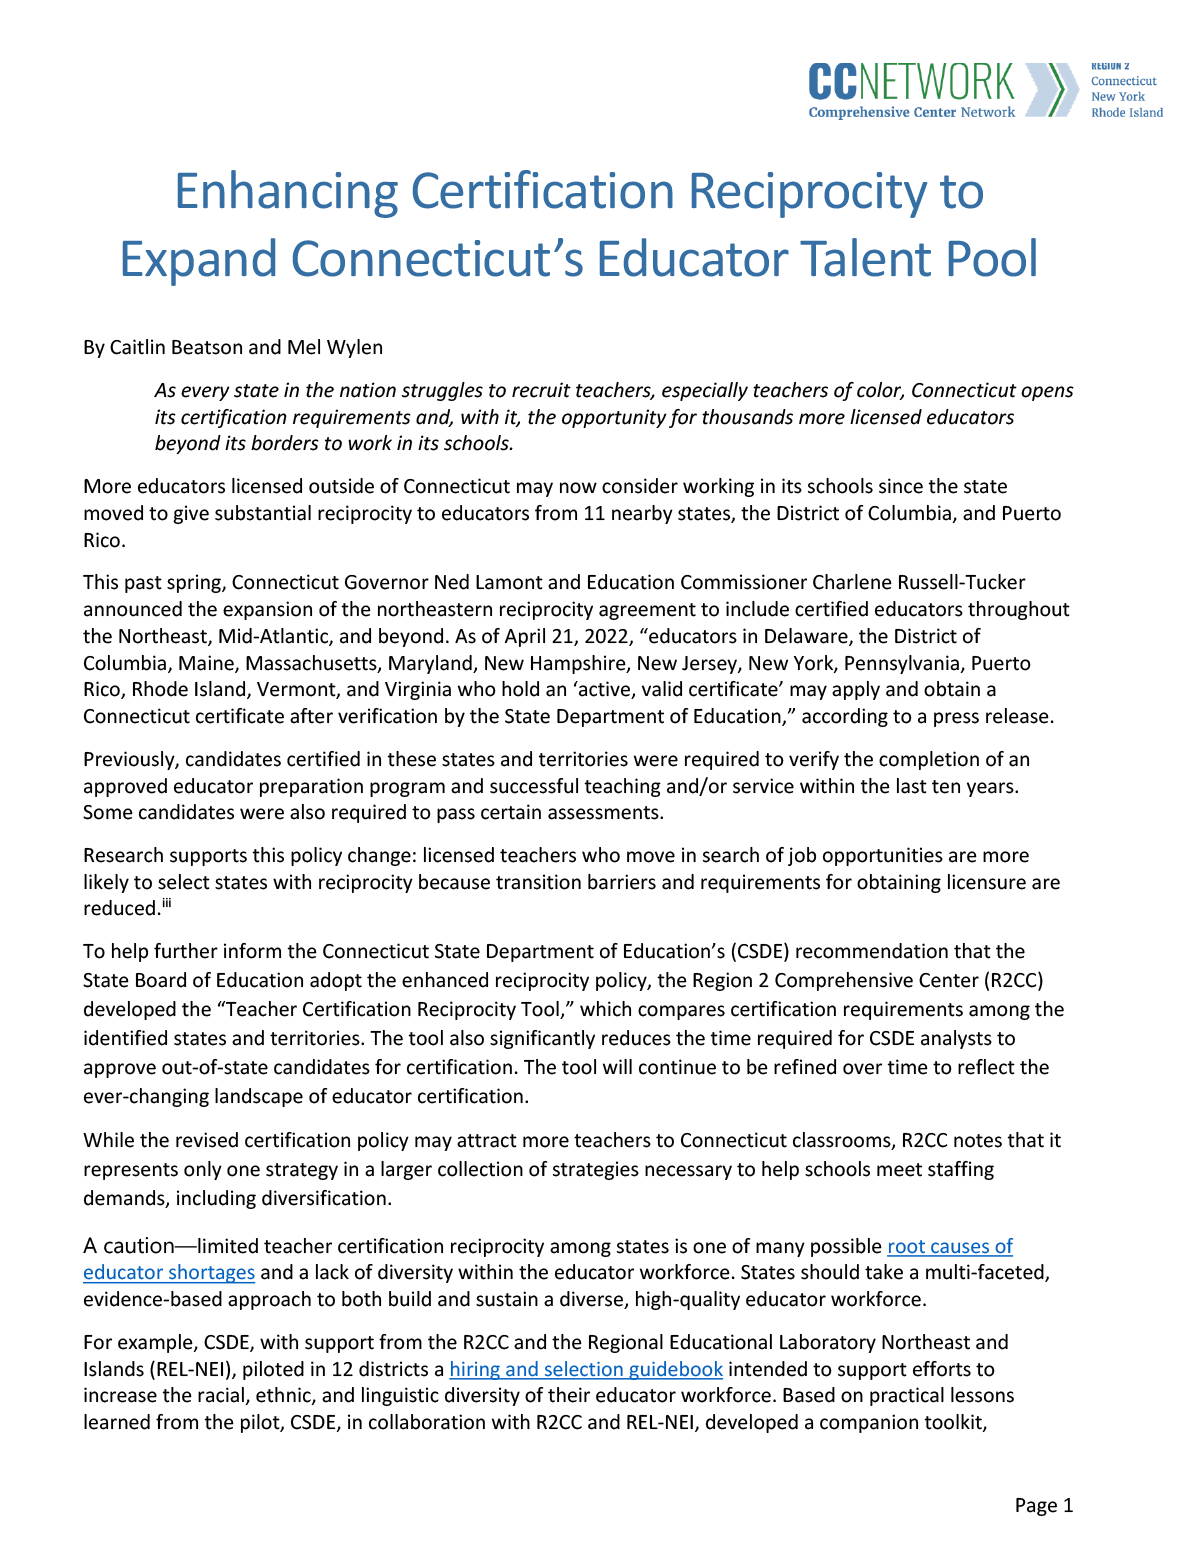 Enhancing Certification Reciprocity to Expand Connecticut’s Educator Talent Pool